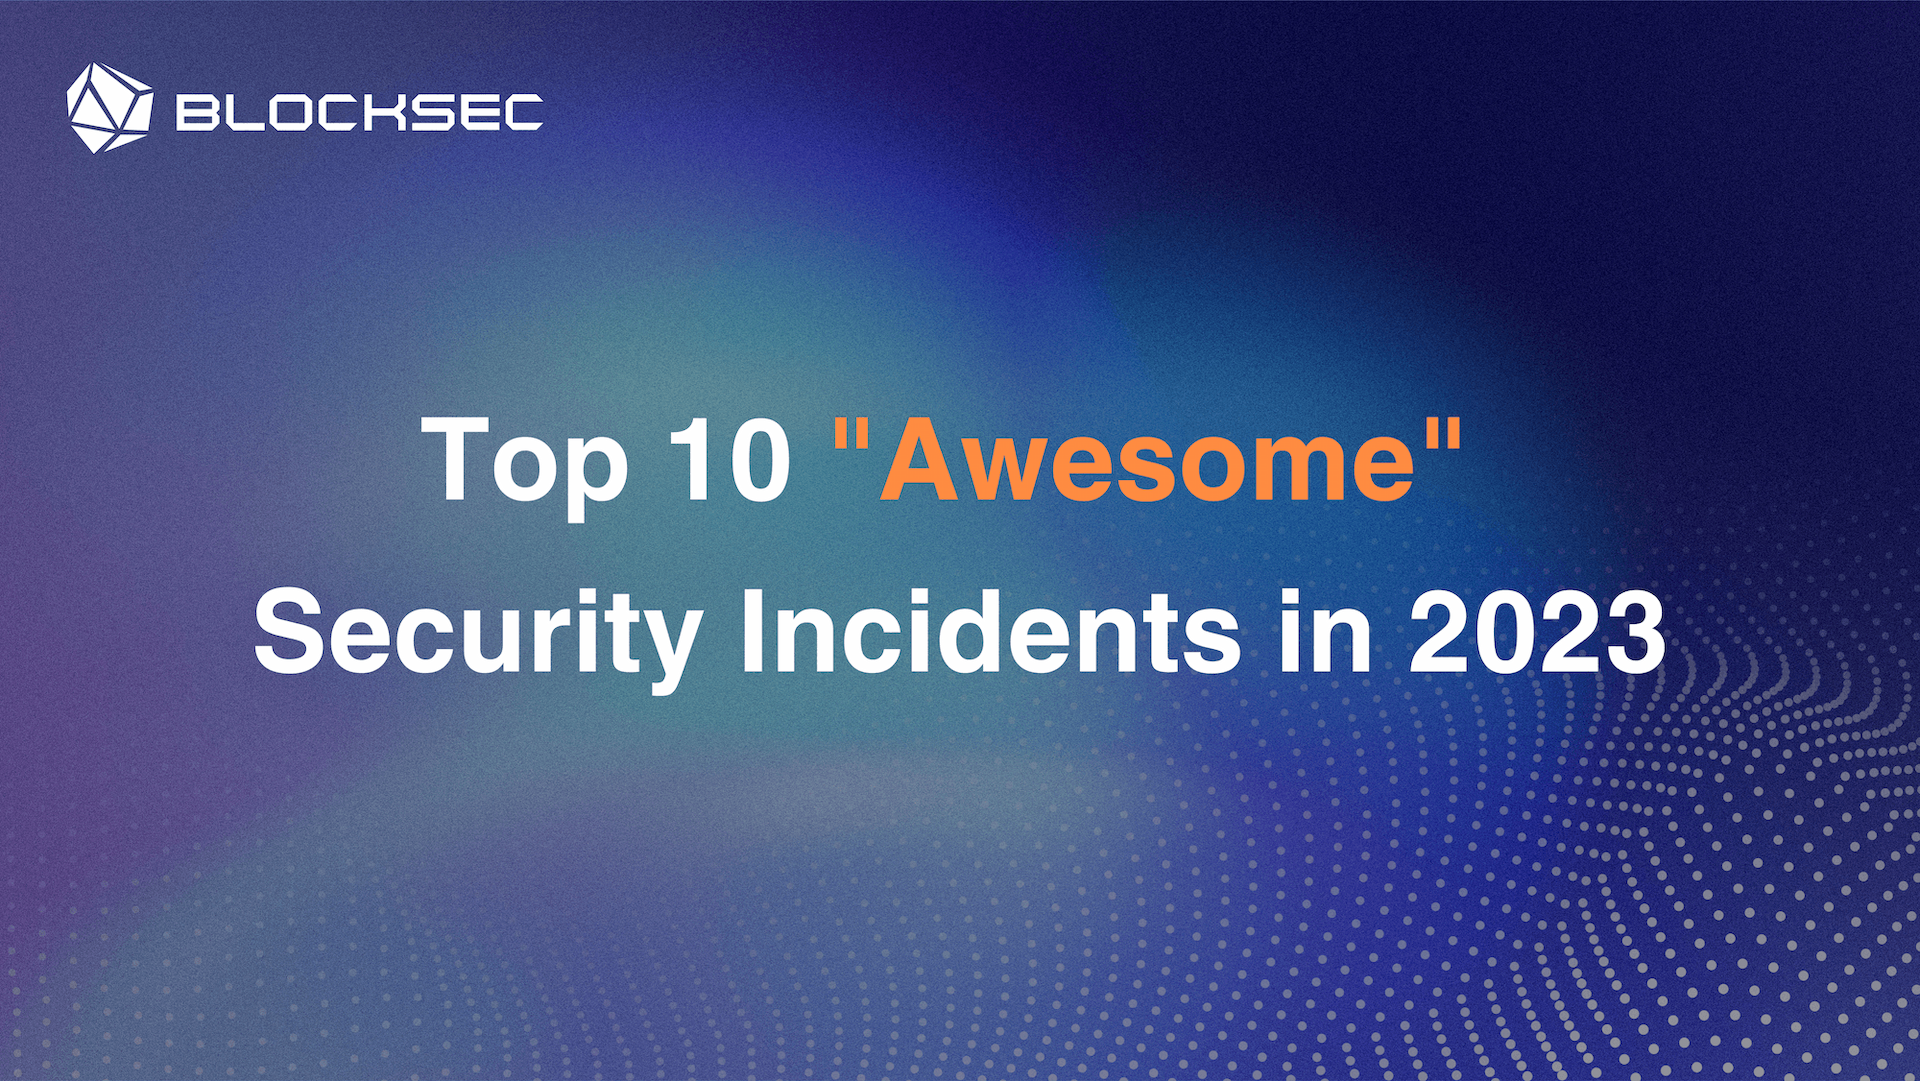 Top 10 "Awesome" Security Incidents in 2023